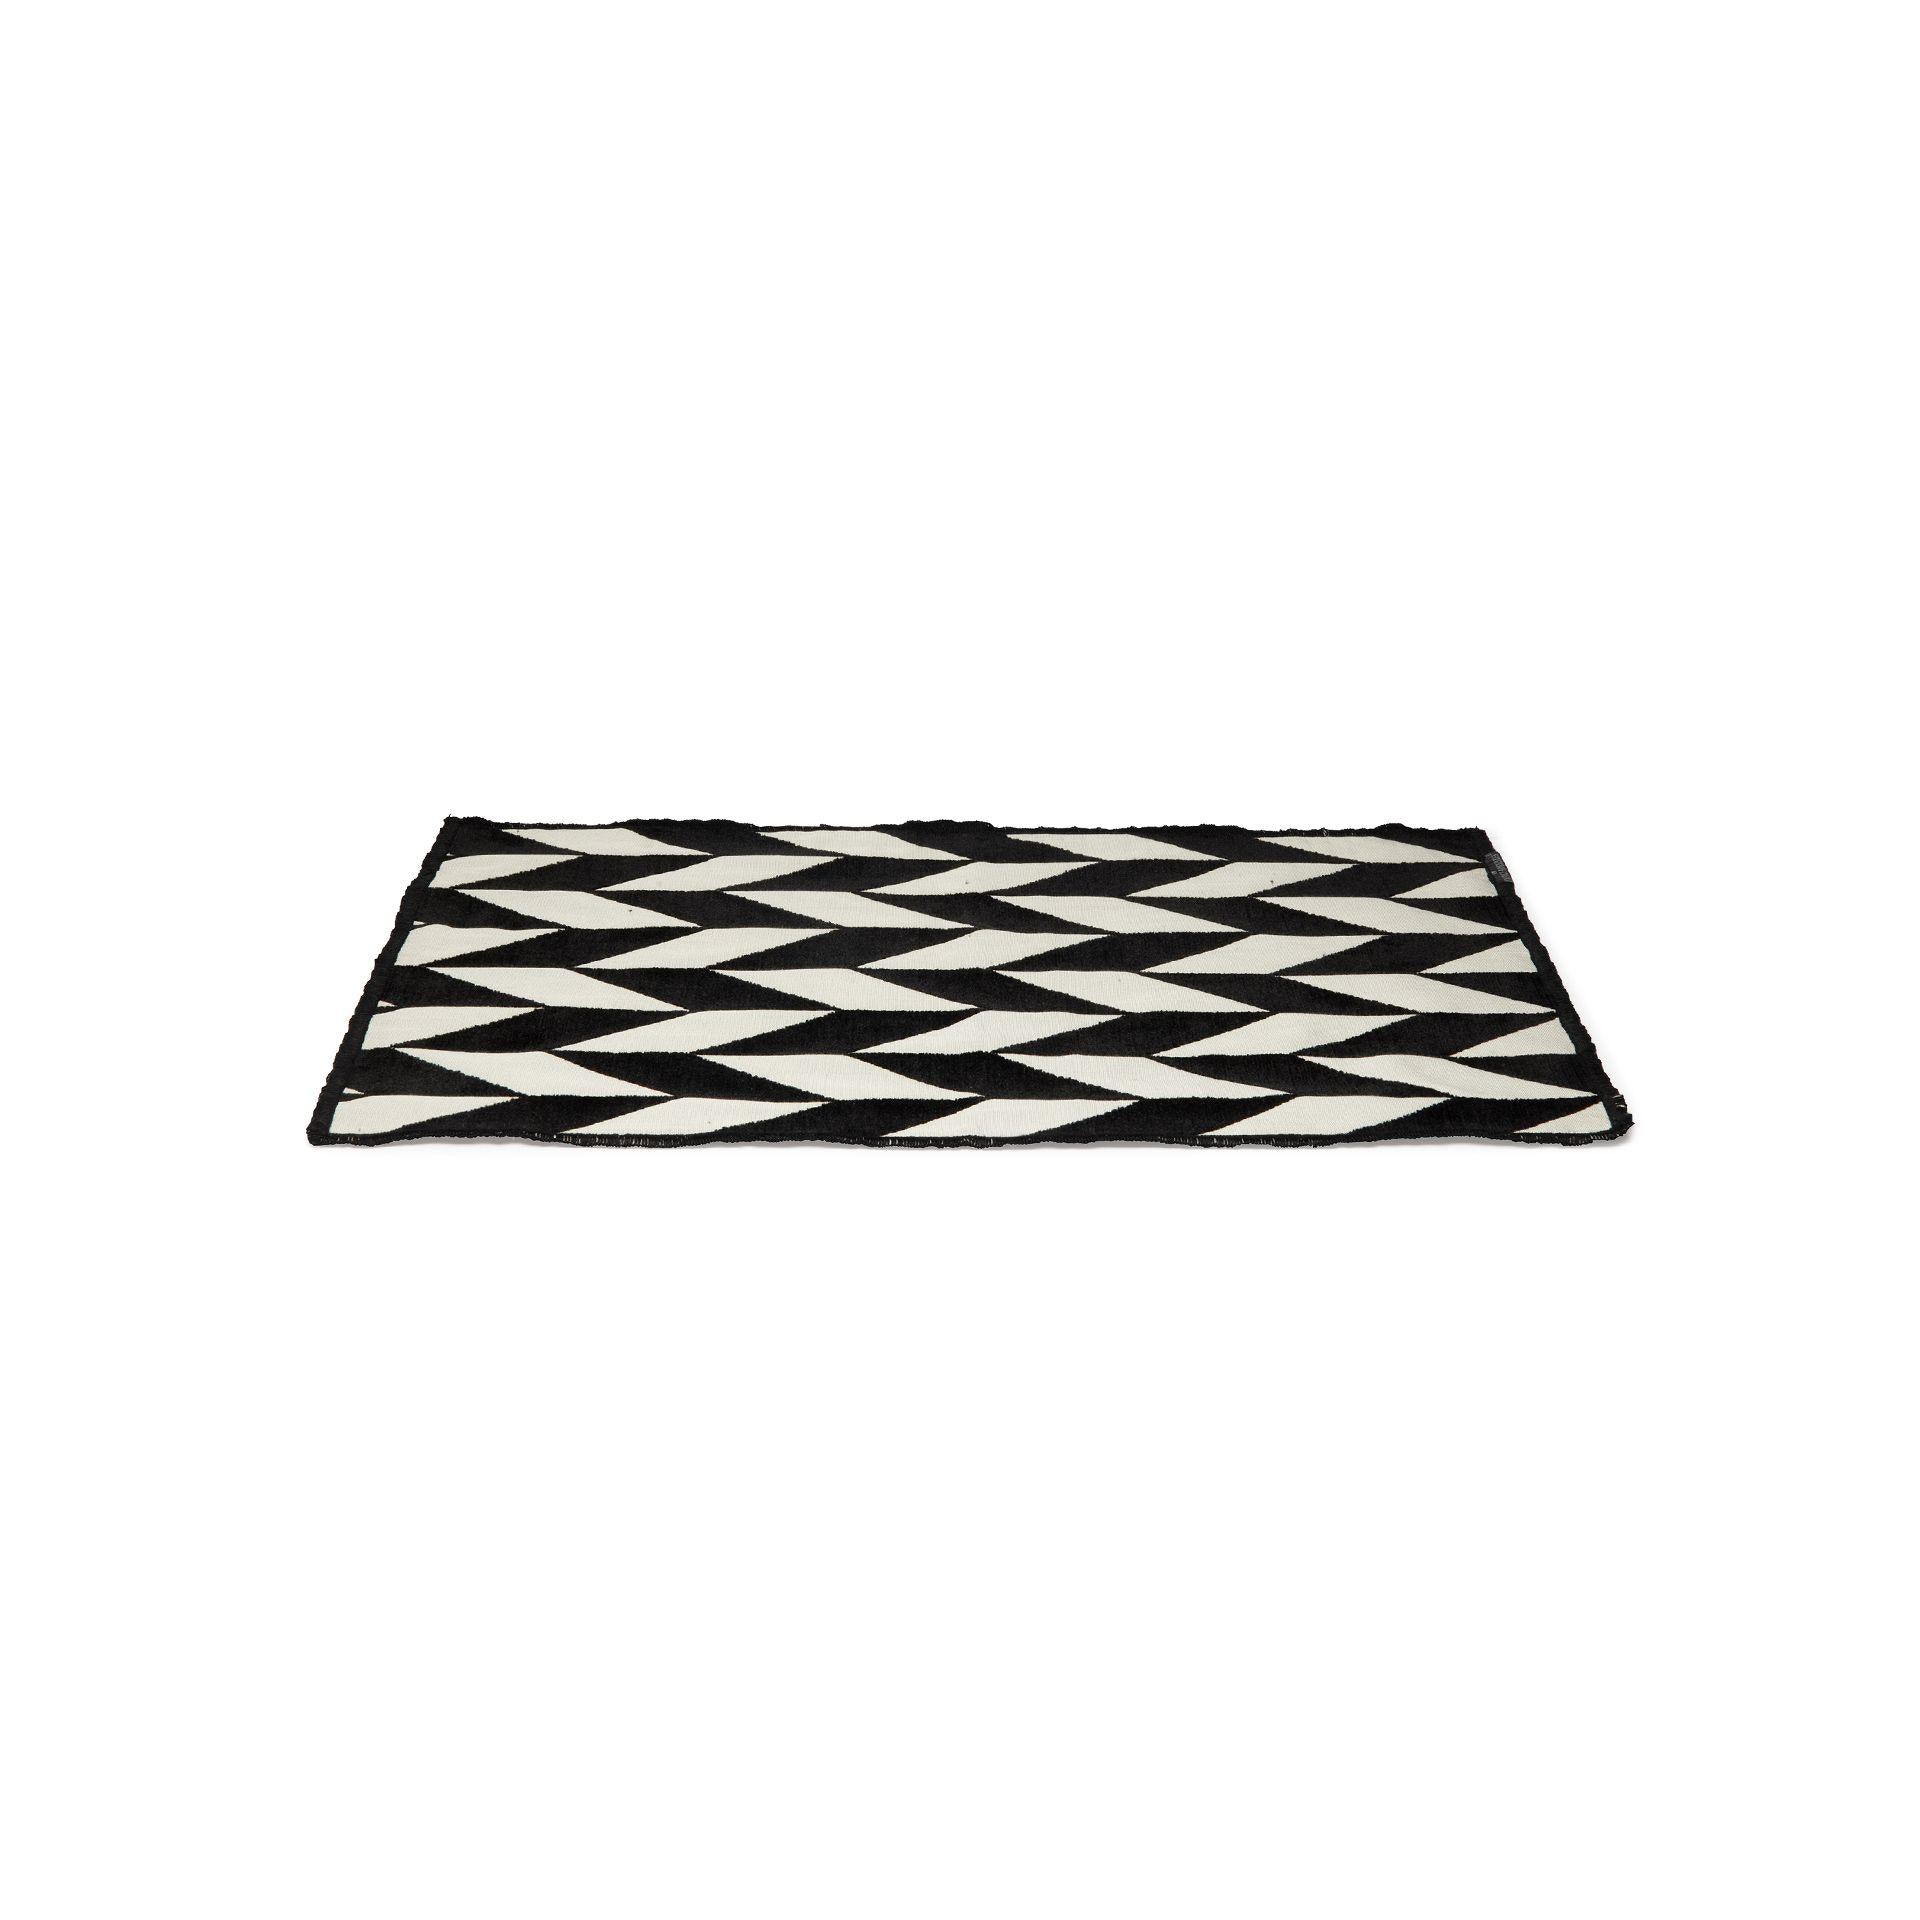 Dutchdeluxes Placemat Set Of 4 Black & White, Fishbone